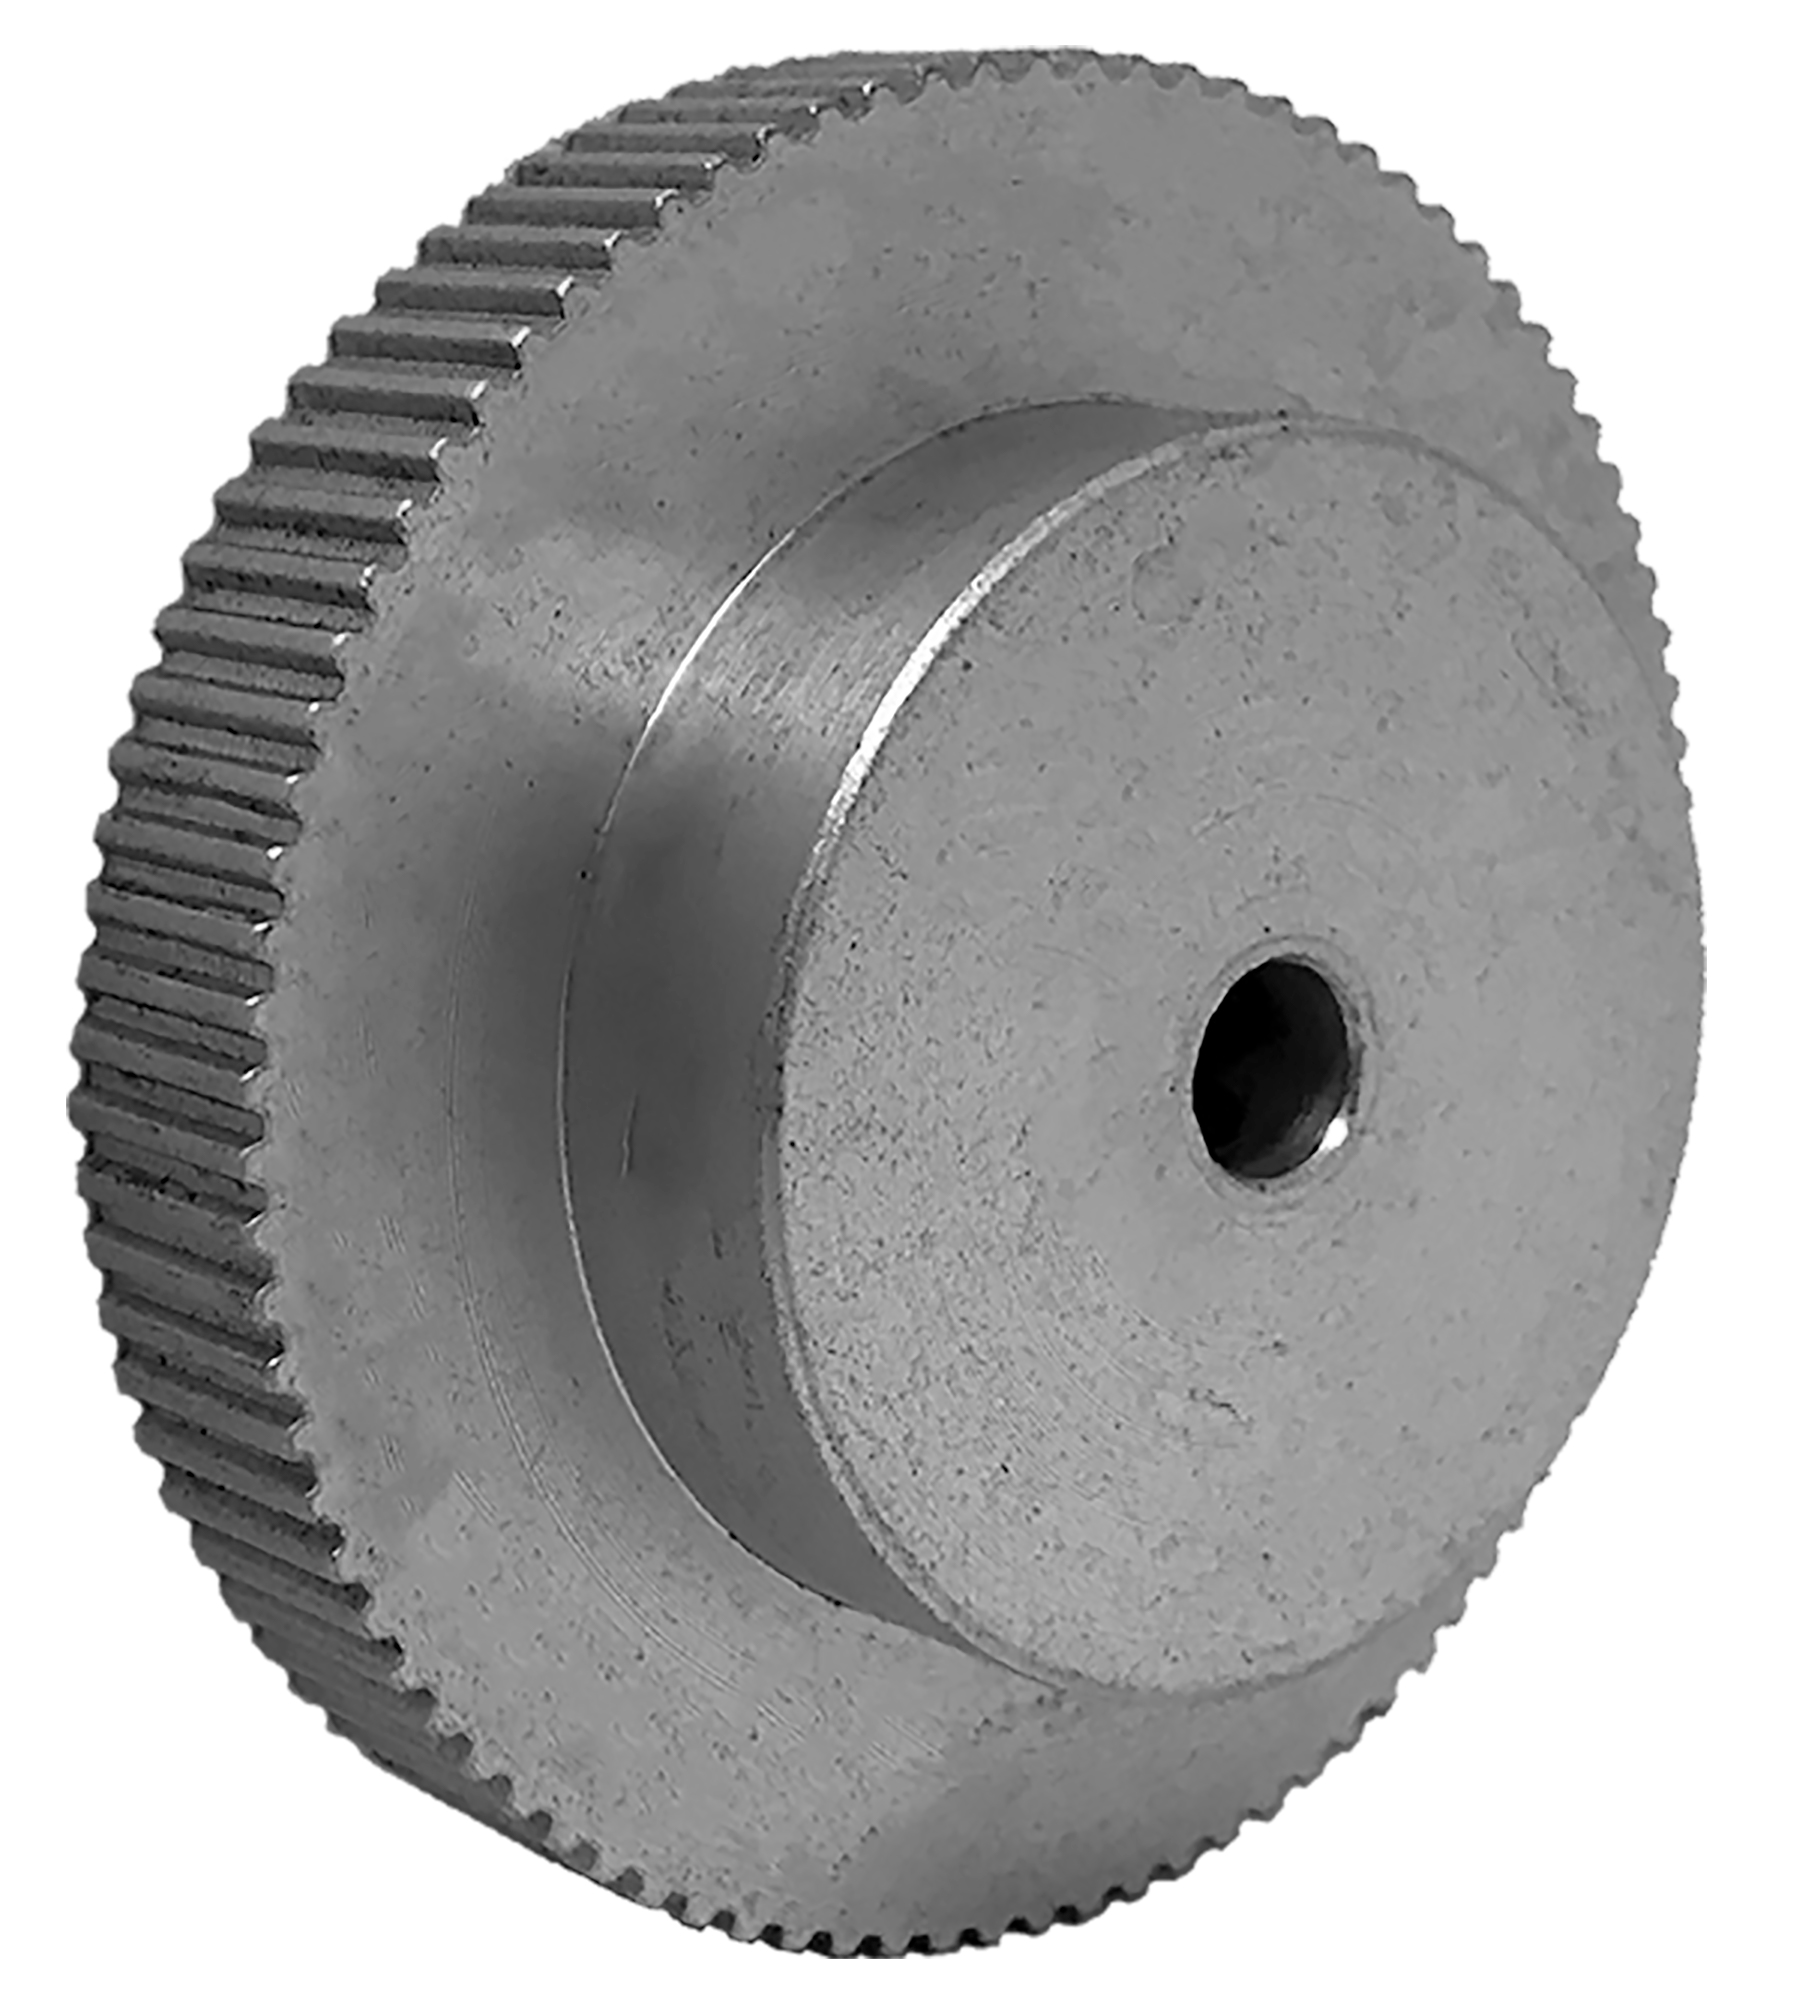 88LT187-6A5 - Aluminum Imperial Pitch Pulleys